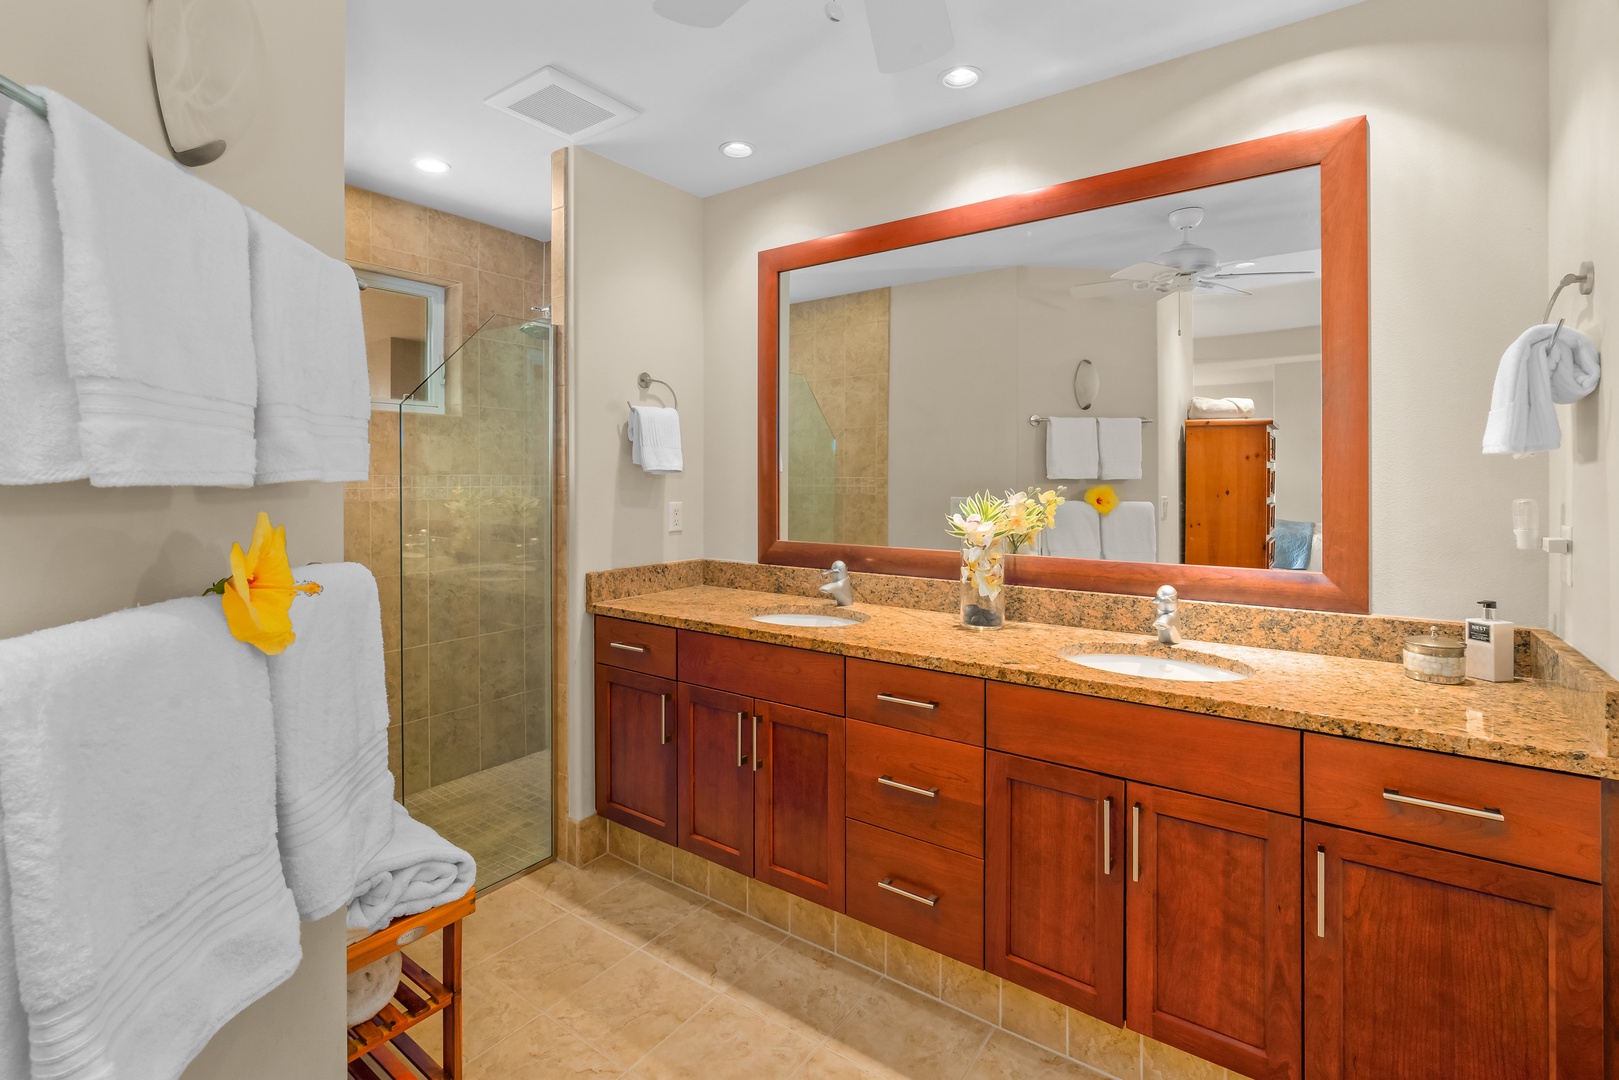 Princeville Vacation Rentals, Noelani Kai - The ensuite bathroom, features a walk-in shower, double sinks, and a private water closet, adding a touch of spa-like luxury.